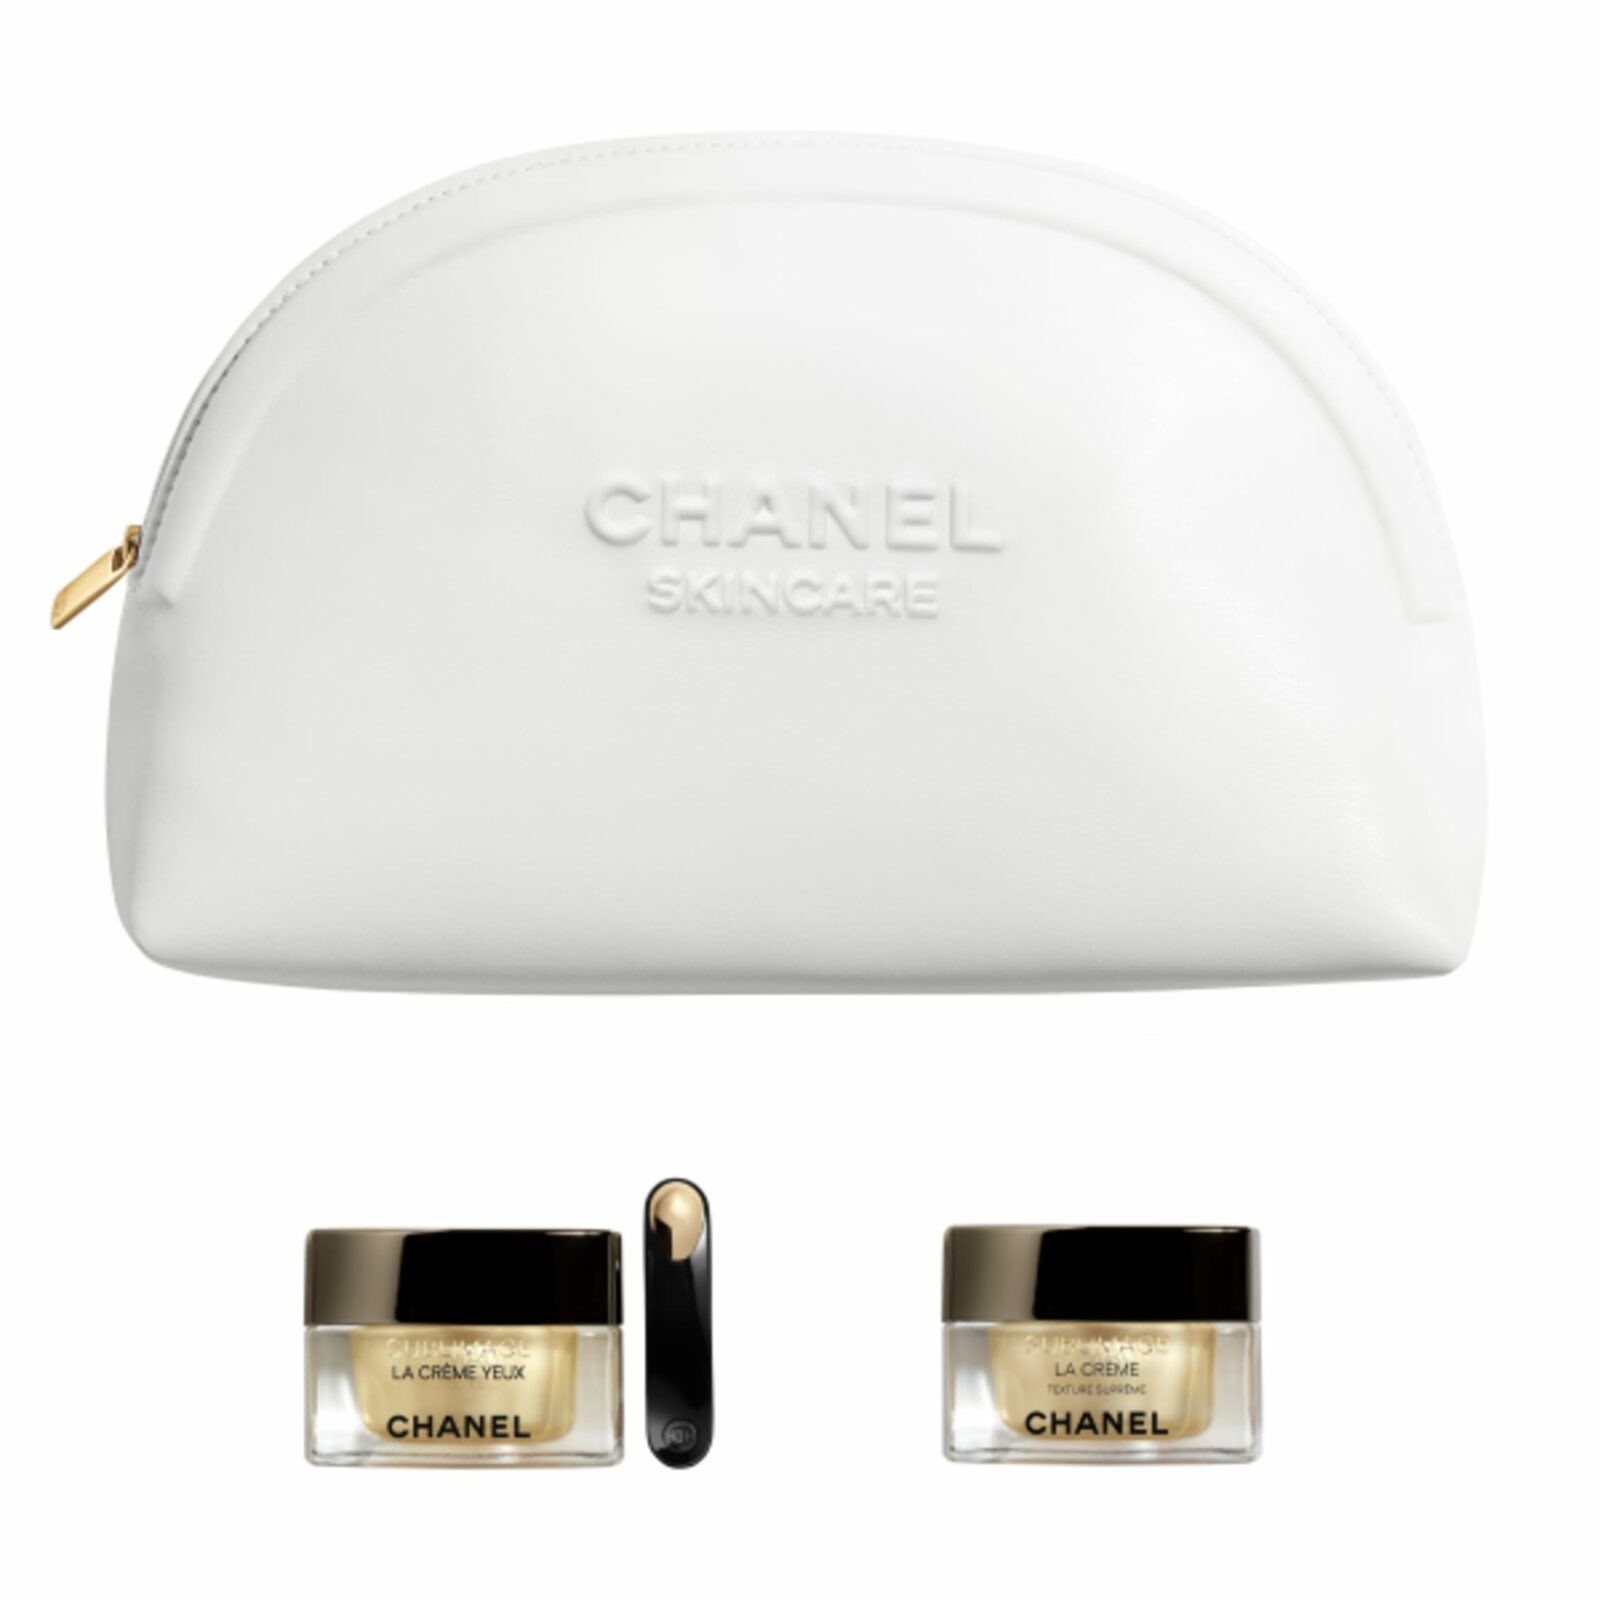 Chanel Skincare Review- The 21 Best-Selling Chanel Beauty Products